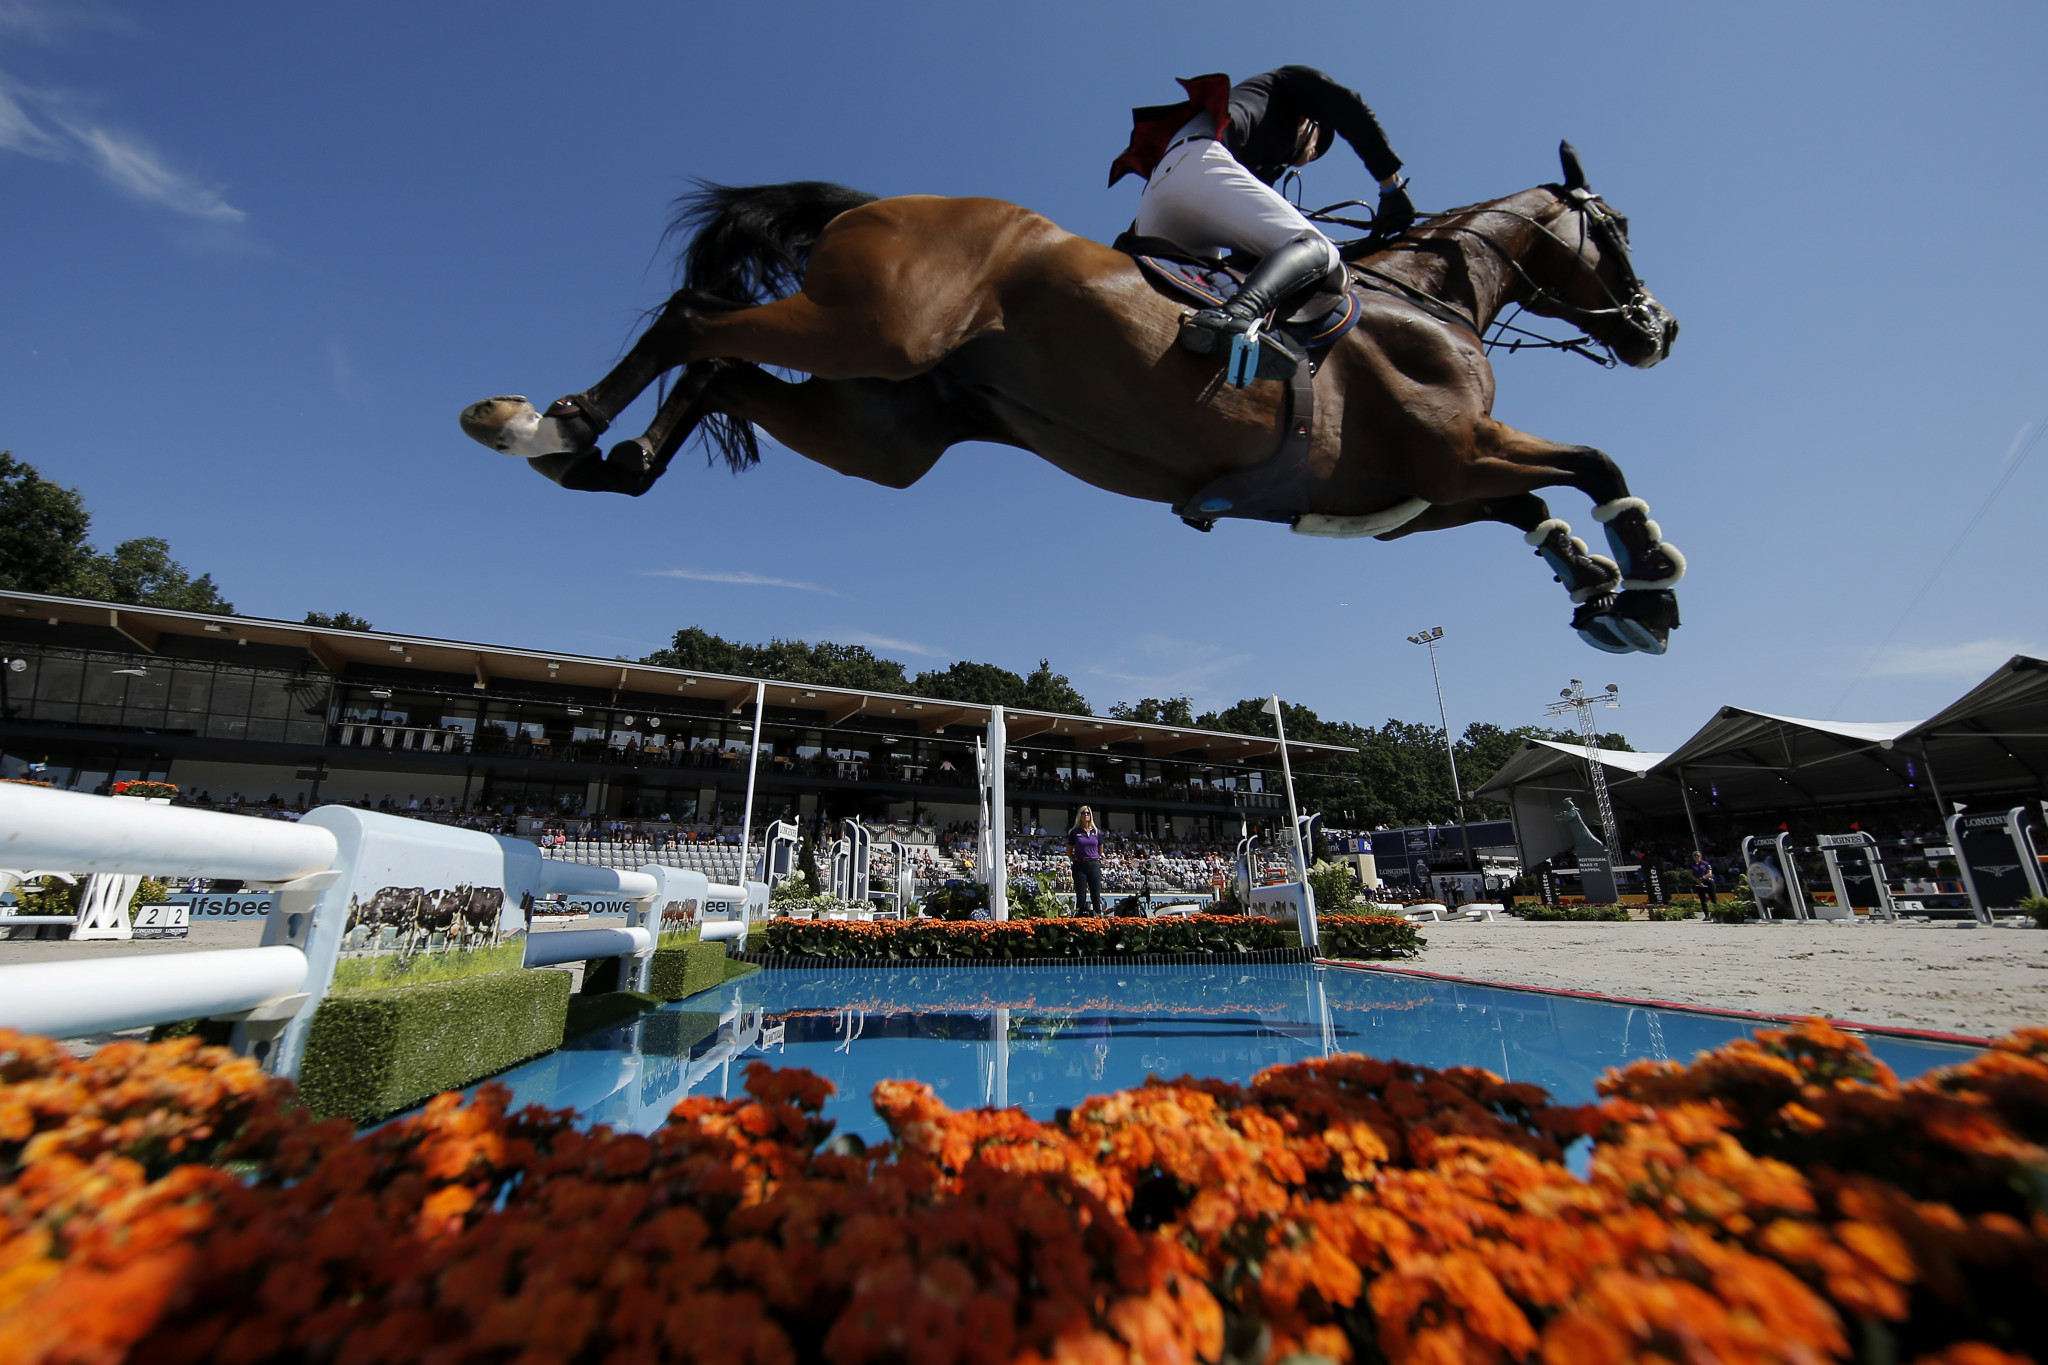 Mike Kawai won the 1.45m class at the Global Champions Tour event in Saint Tropez ©Getty Images